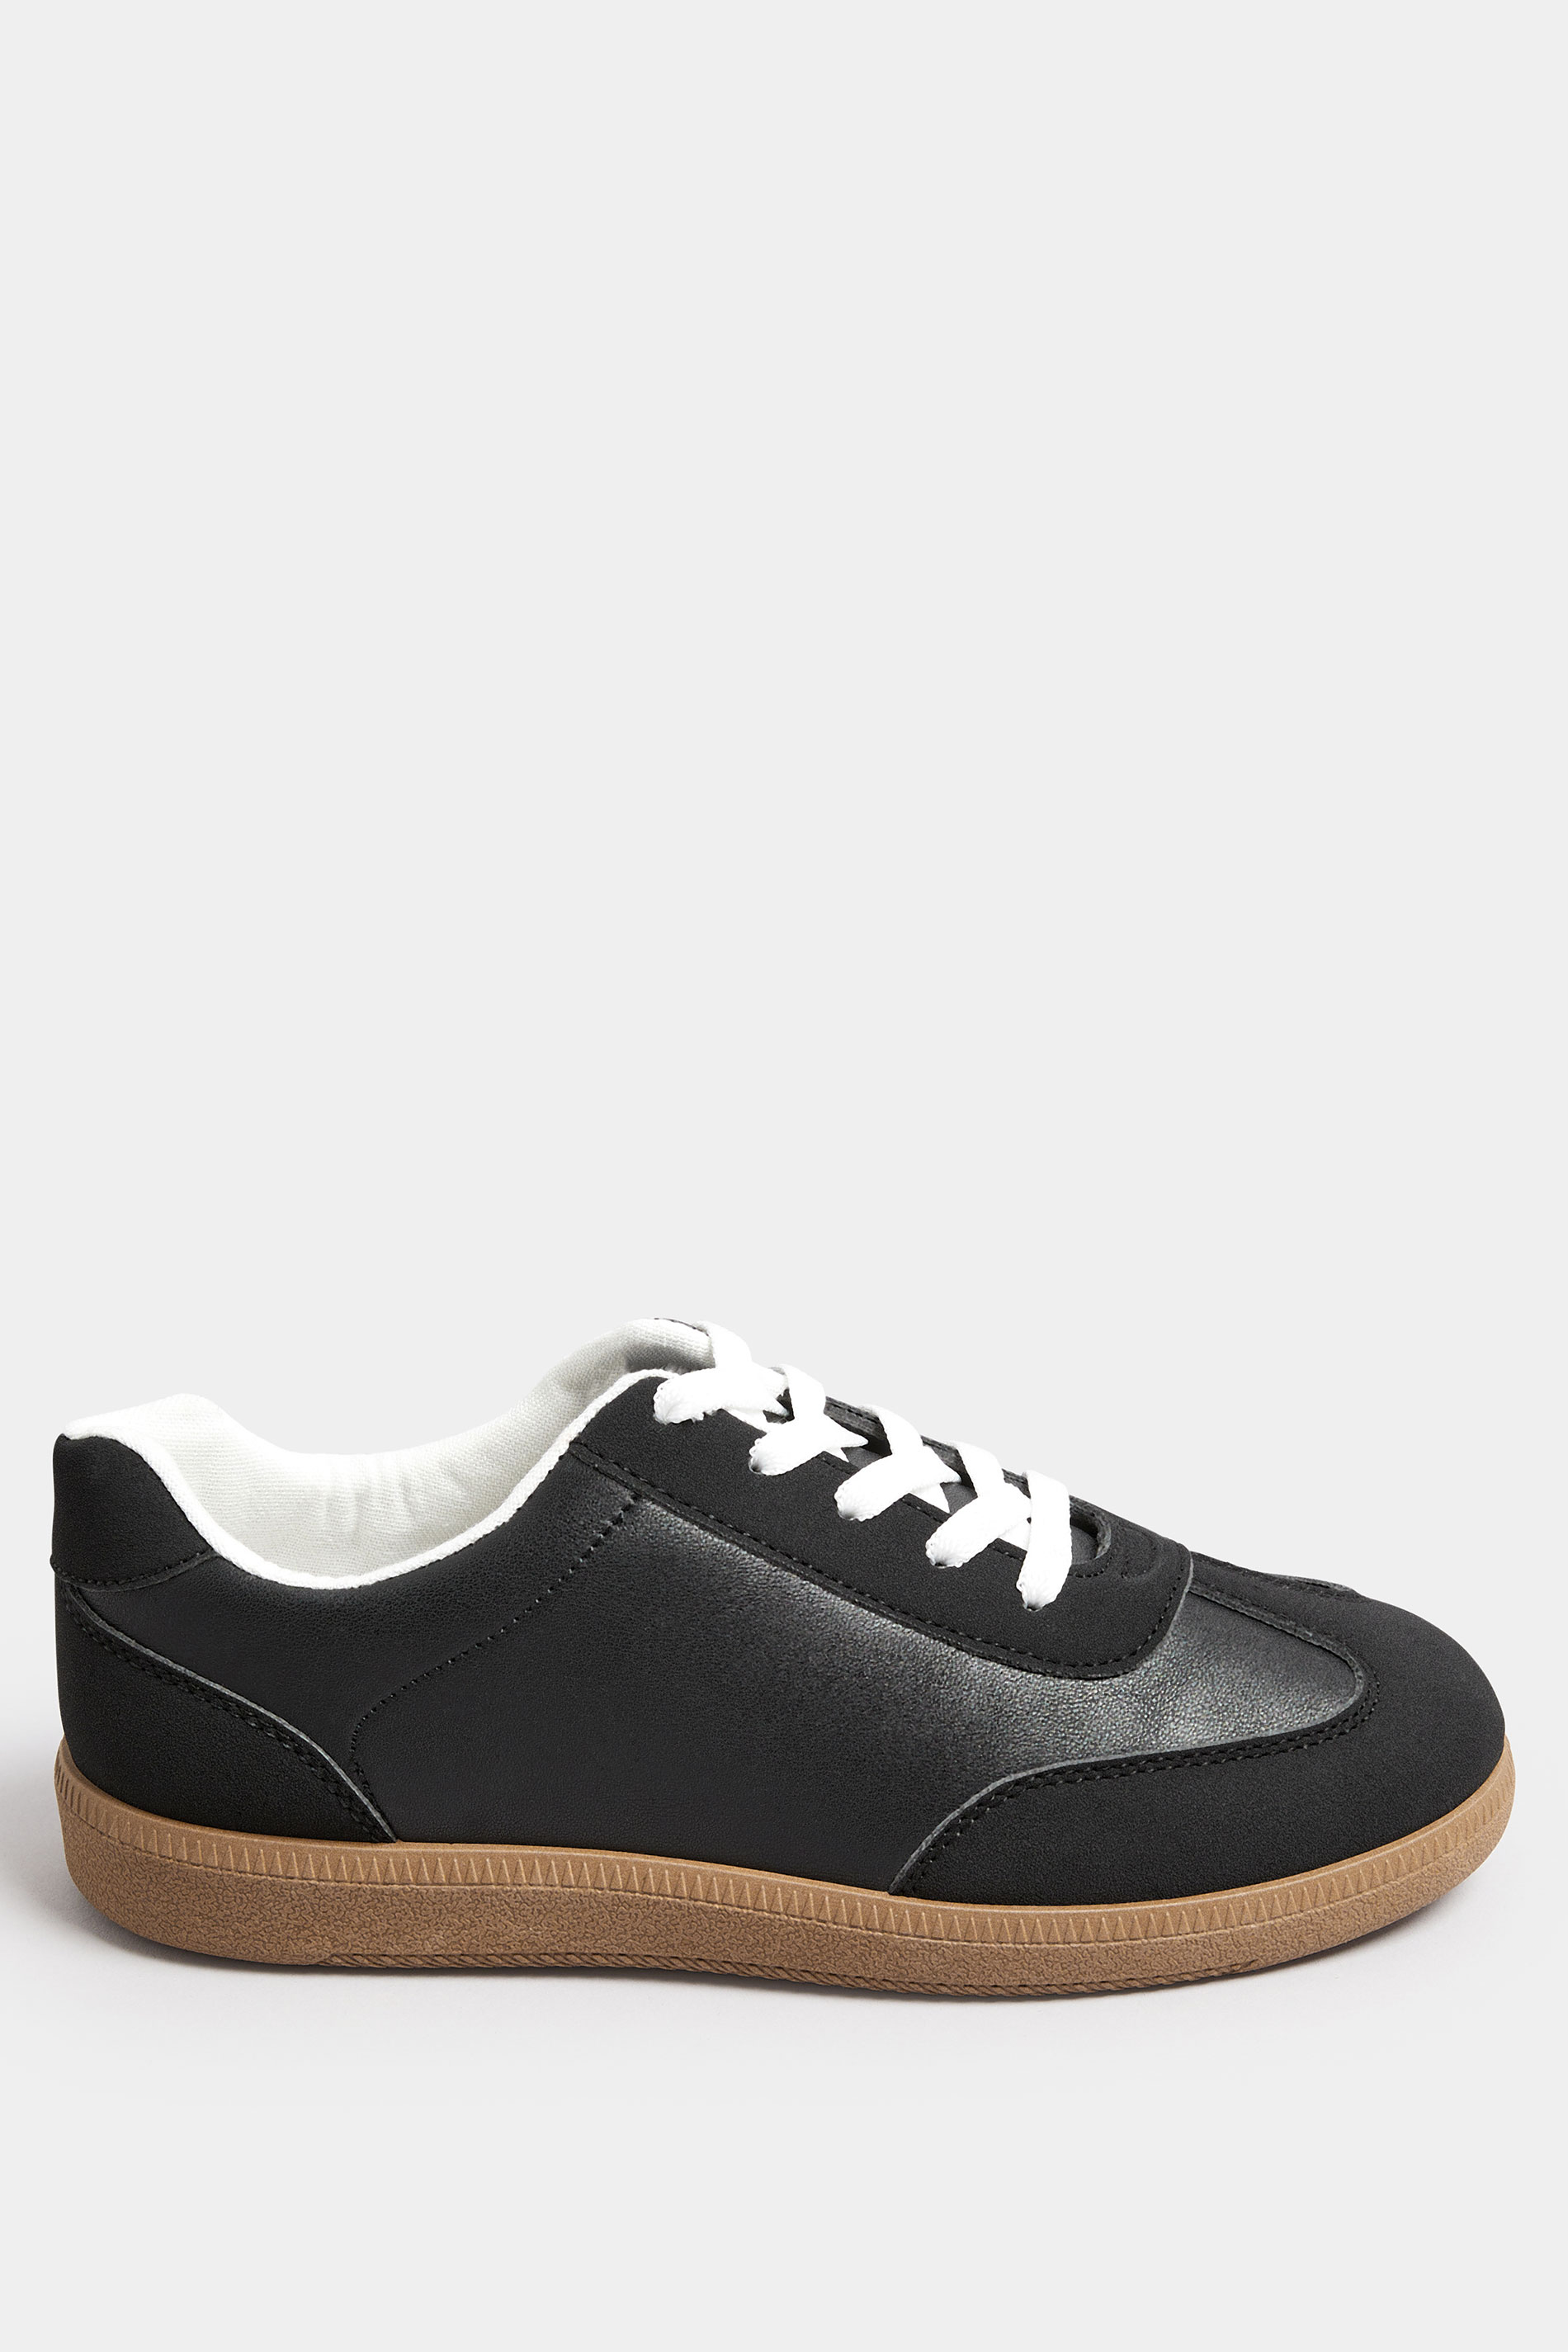 Black Retro Gum Sole Trainers In Extra Wide EEE Fit | Yours Clothing 3